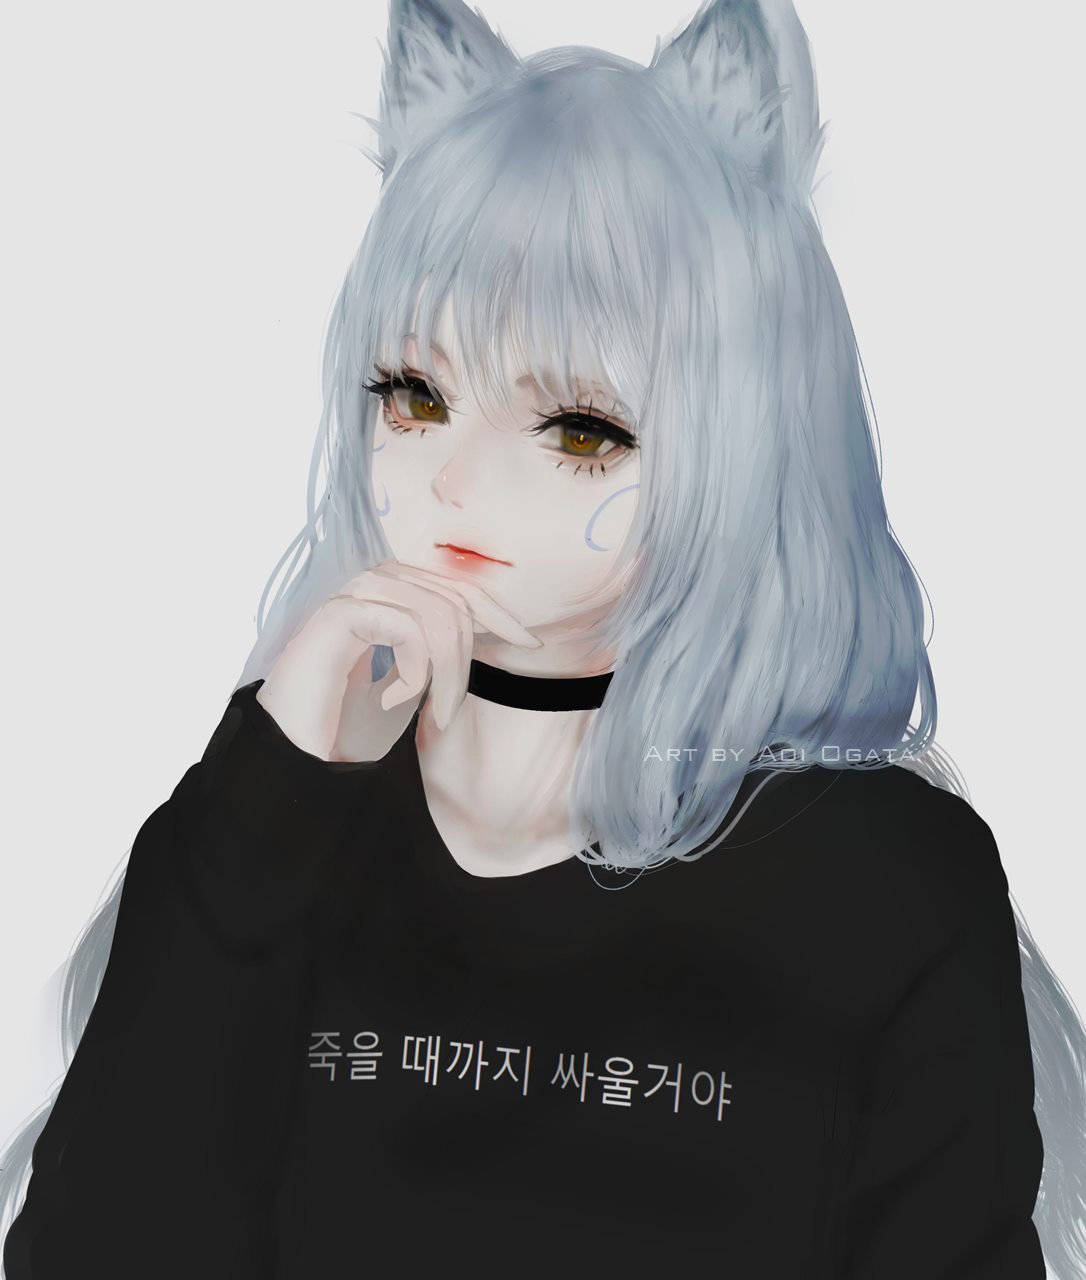 Image about girl in Korean Anime by 아이돌 - 얼짱 on We Heart It | Cute girl  wallpaper, Cute anime wallpaper, Cartoon girl images